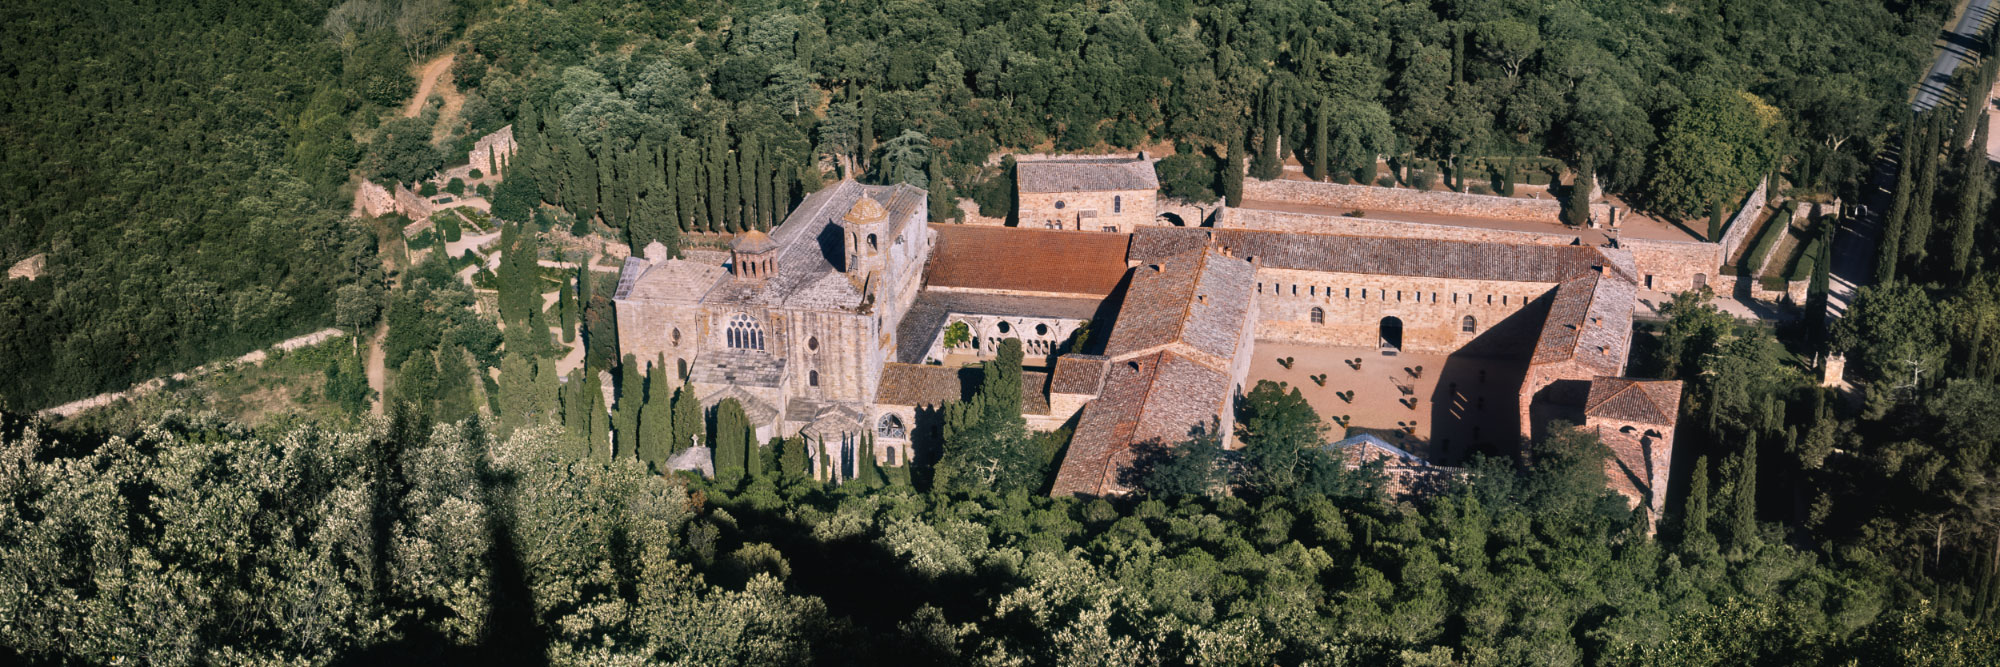 Abbaye de Fontfroide, Pays Cathare